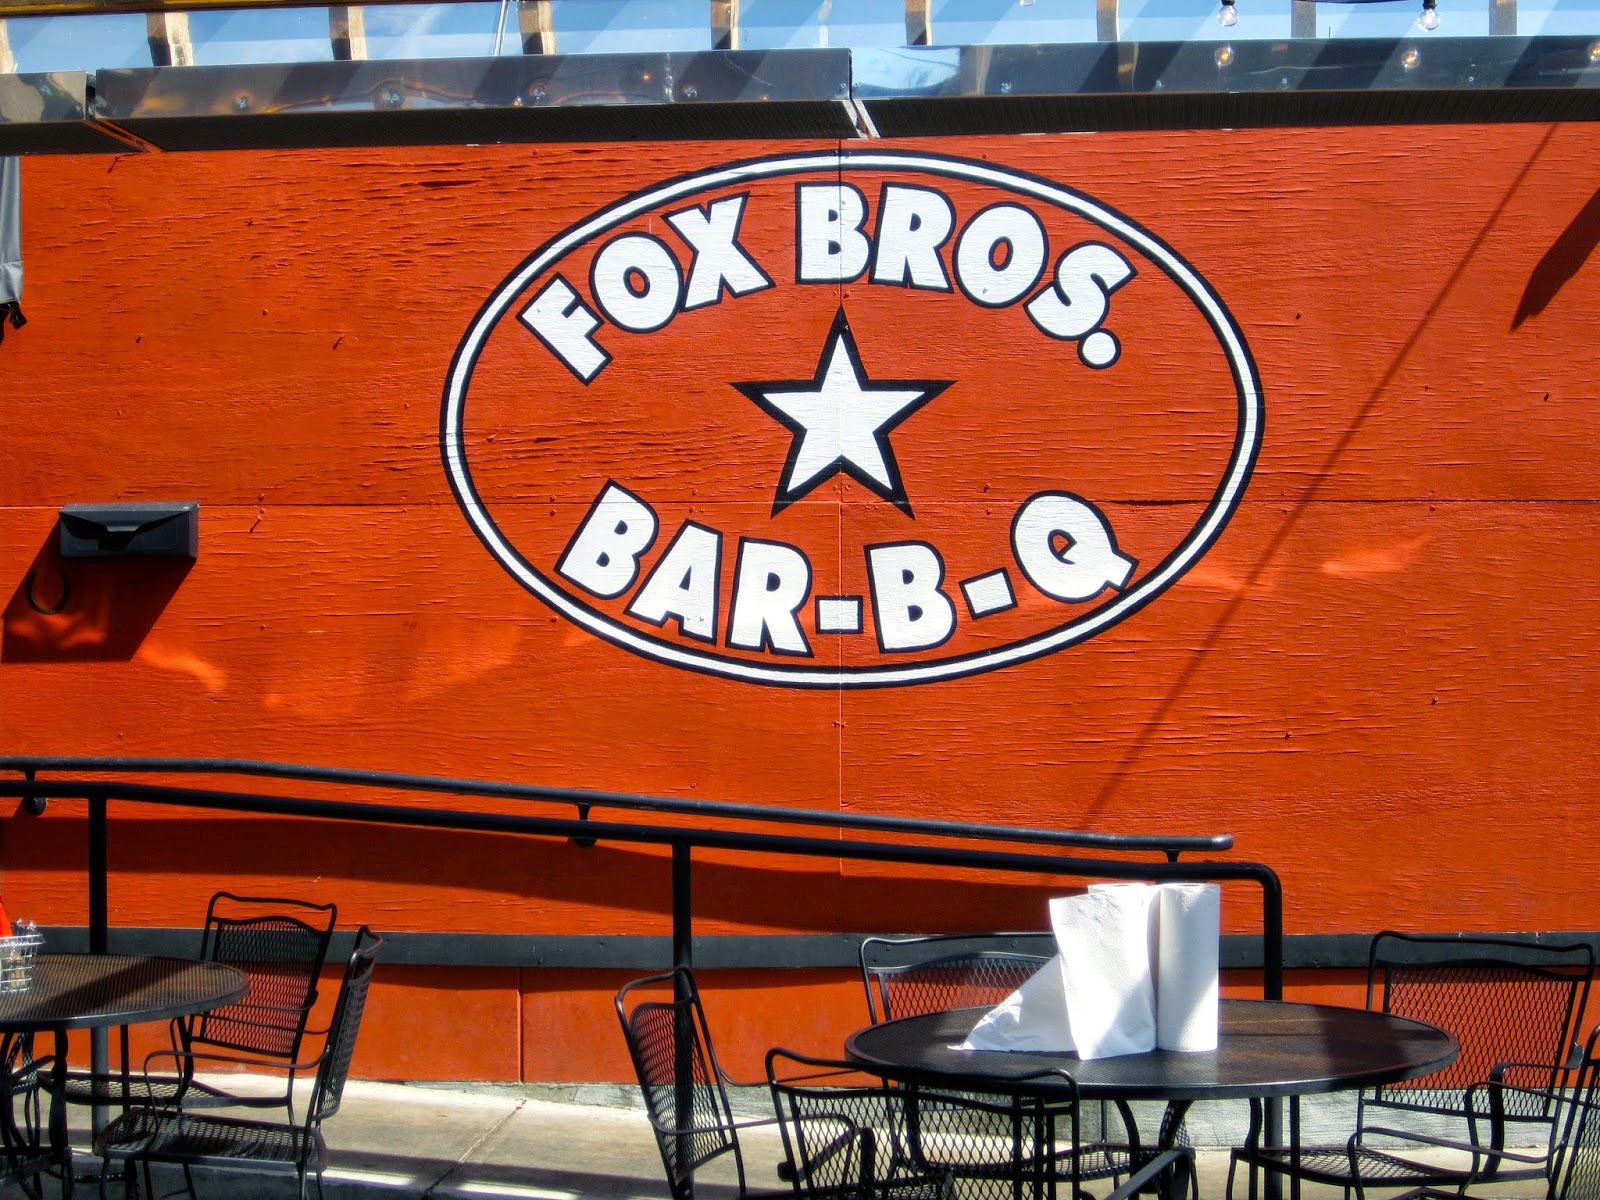 Stroud Is All Over the Place: Fox Brothers and Heirloom - Atlanta BBQ1600 x 1200